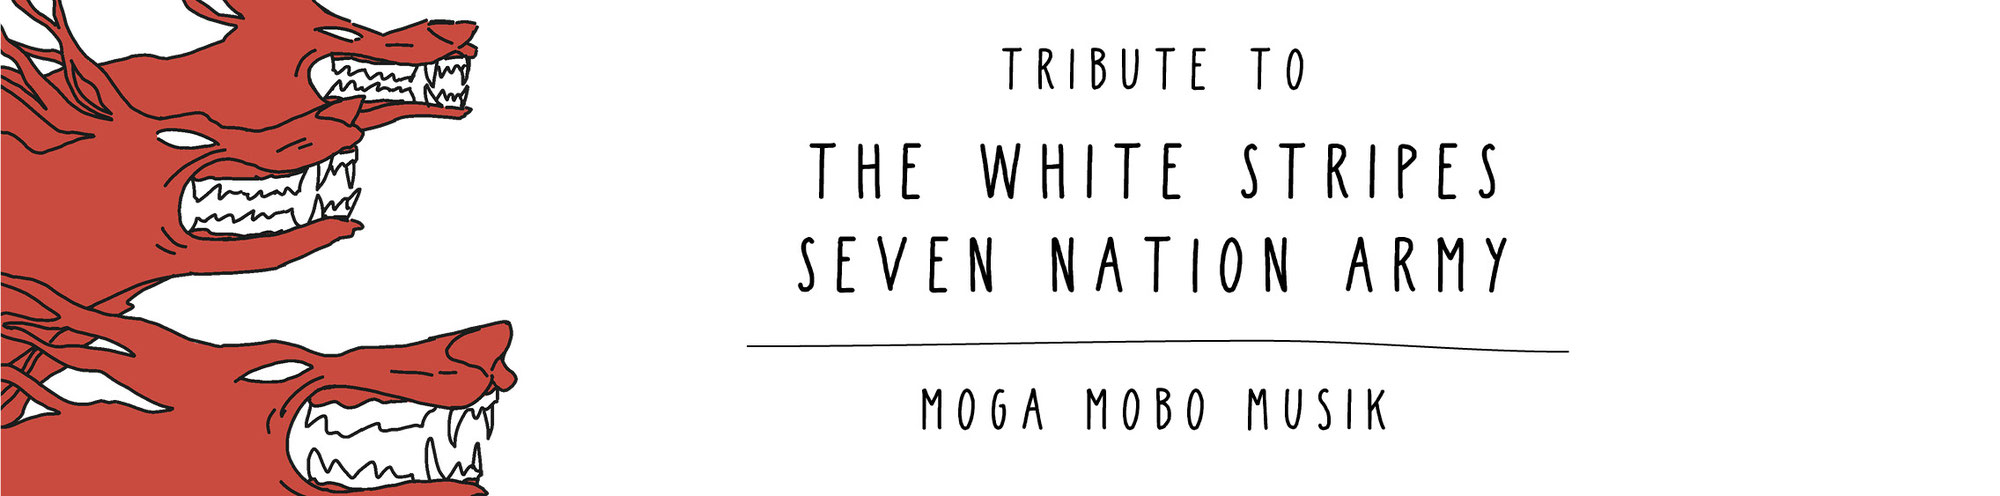 TRIBUTE TO THE WHITE STRIPES - SEVEN NATION ARMY